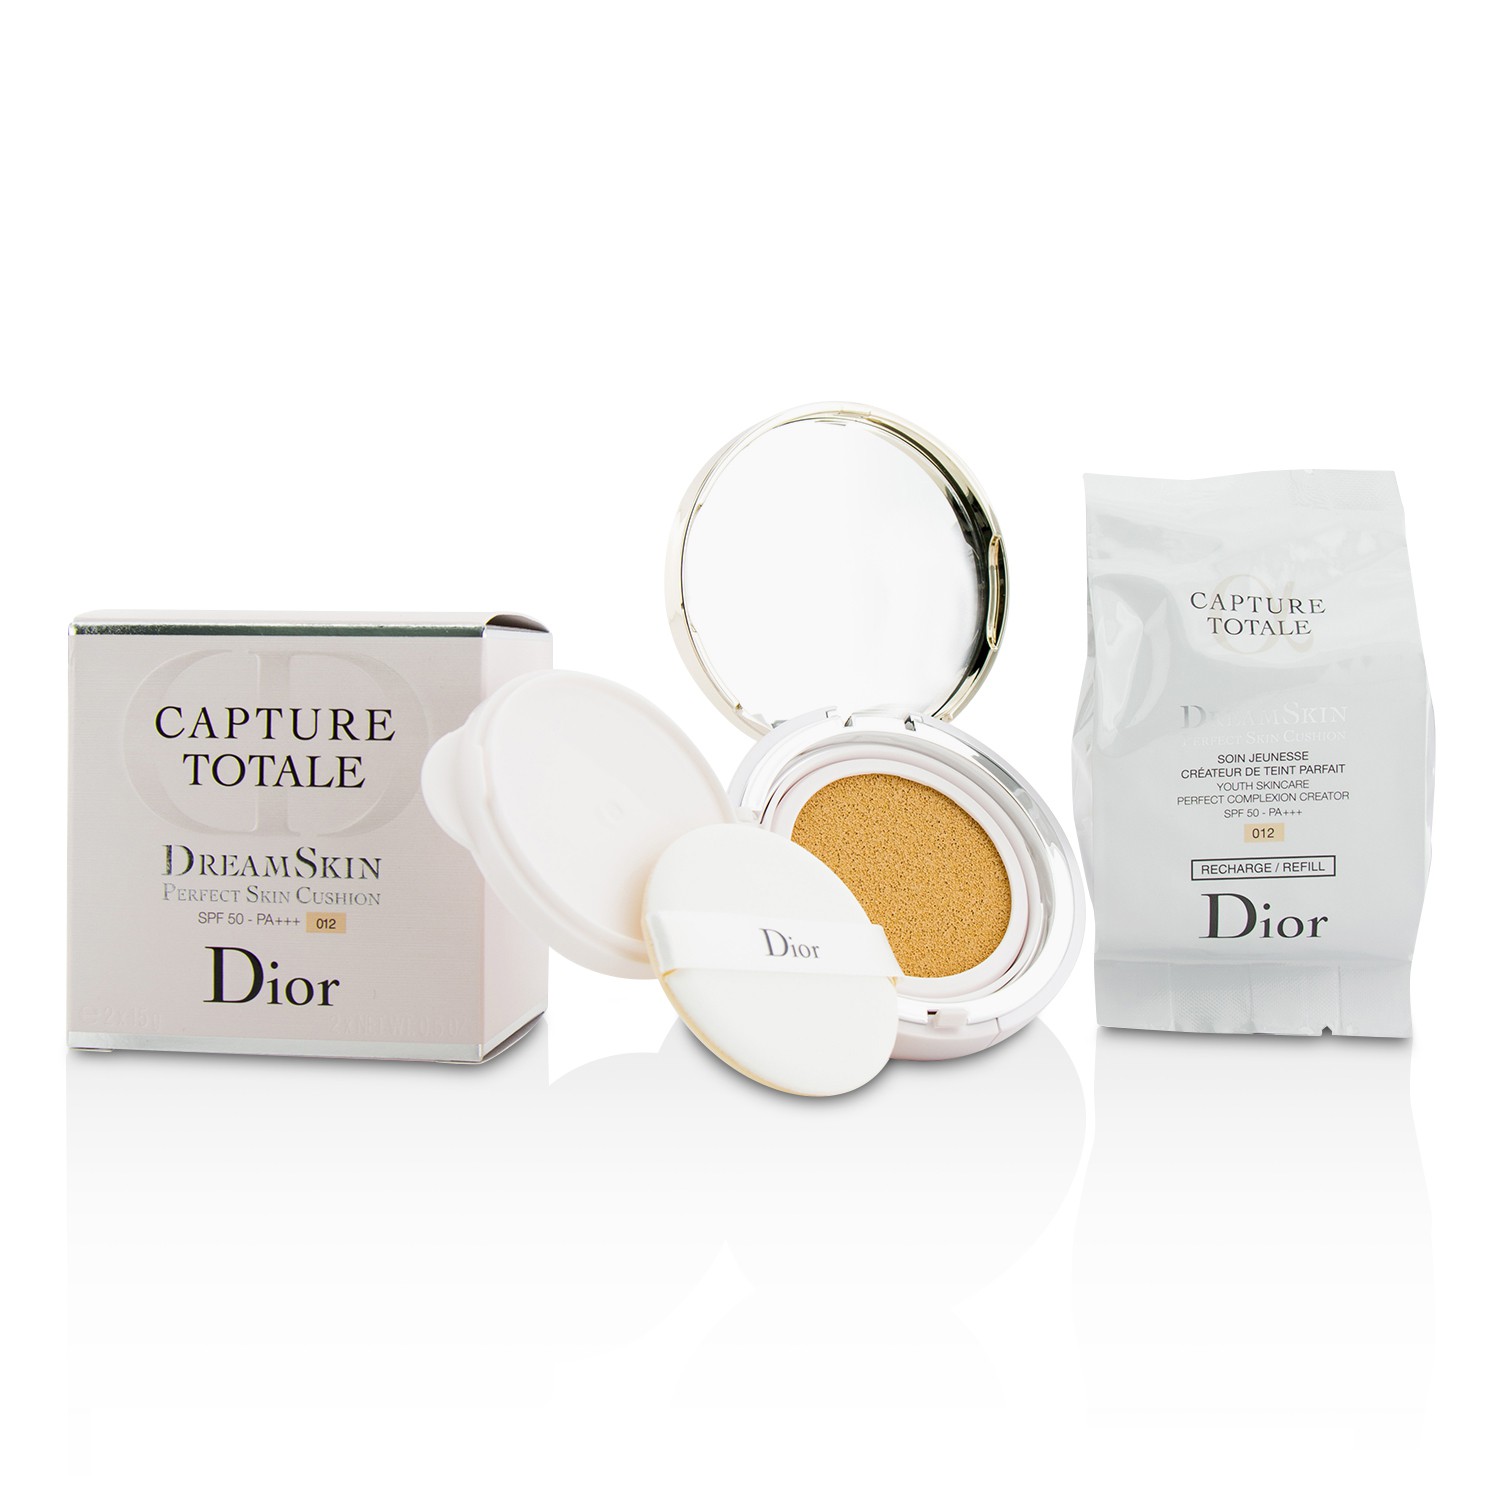 Capture Totale Dreamskin Perfect Skin Cushion SPF 50 With Extra Refill - # 012 Christian Dior Image